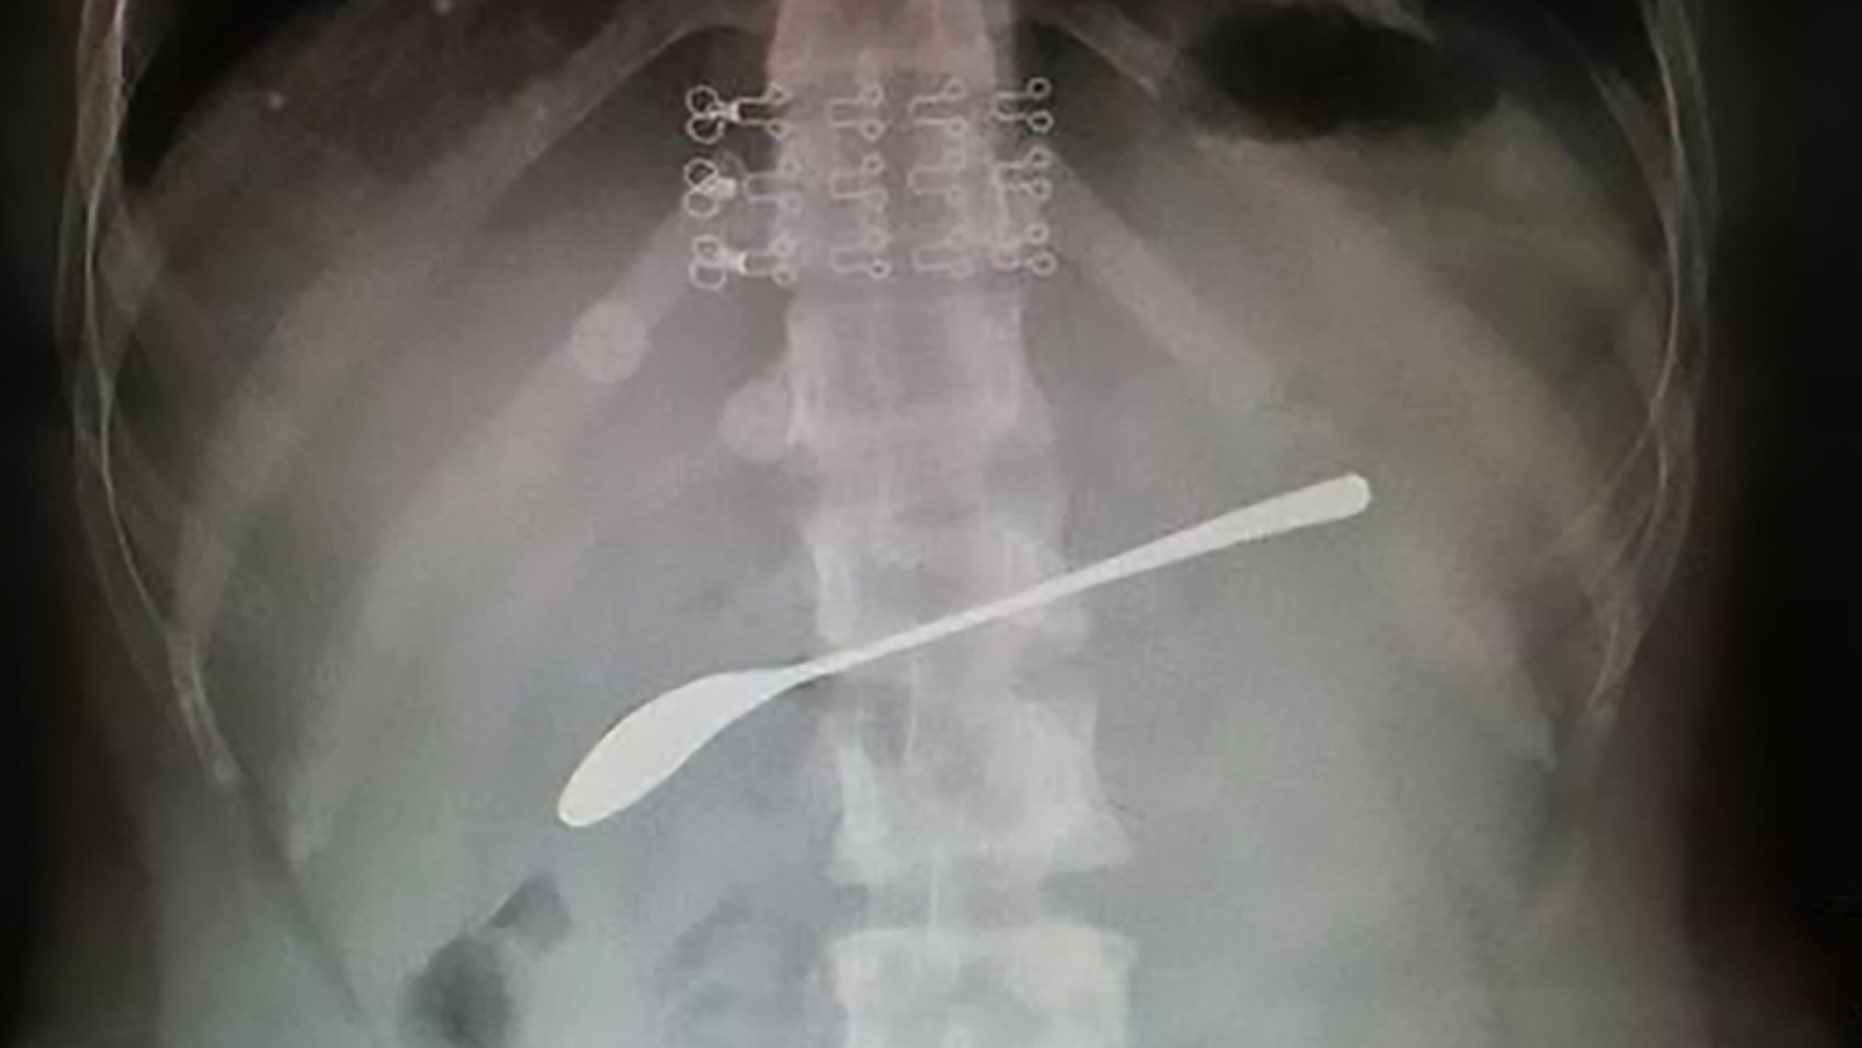 Drunk woman swallowed 6-inch spoon and forgot, report says AsiaWire-DrunkSpoon-01